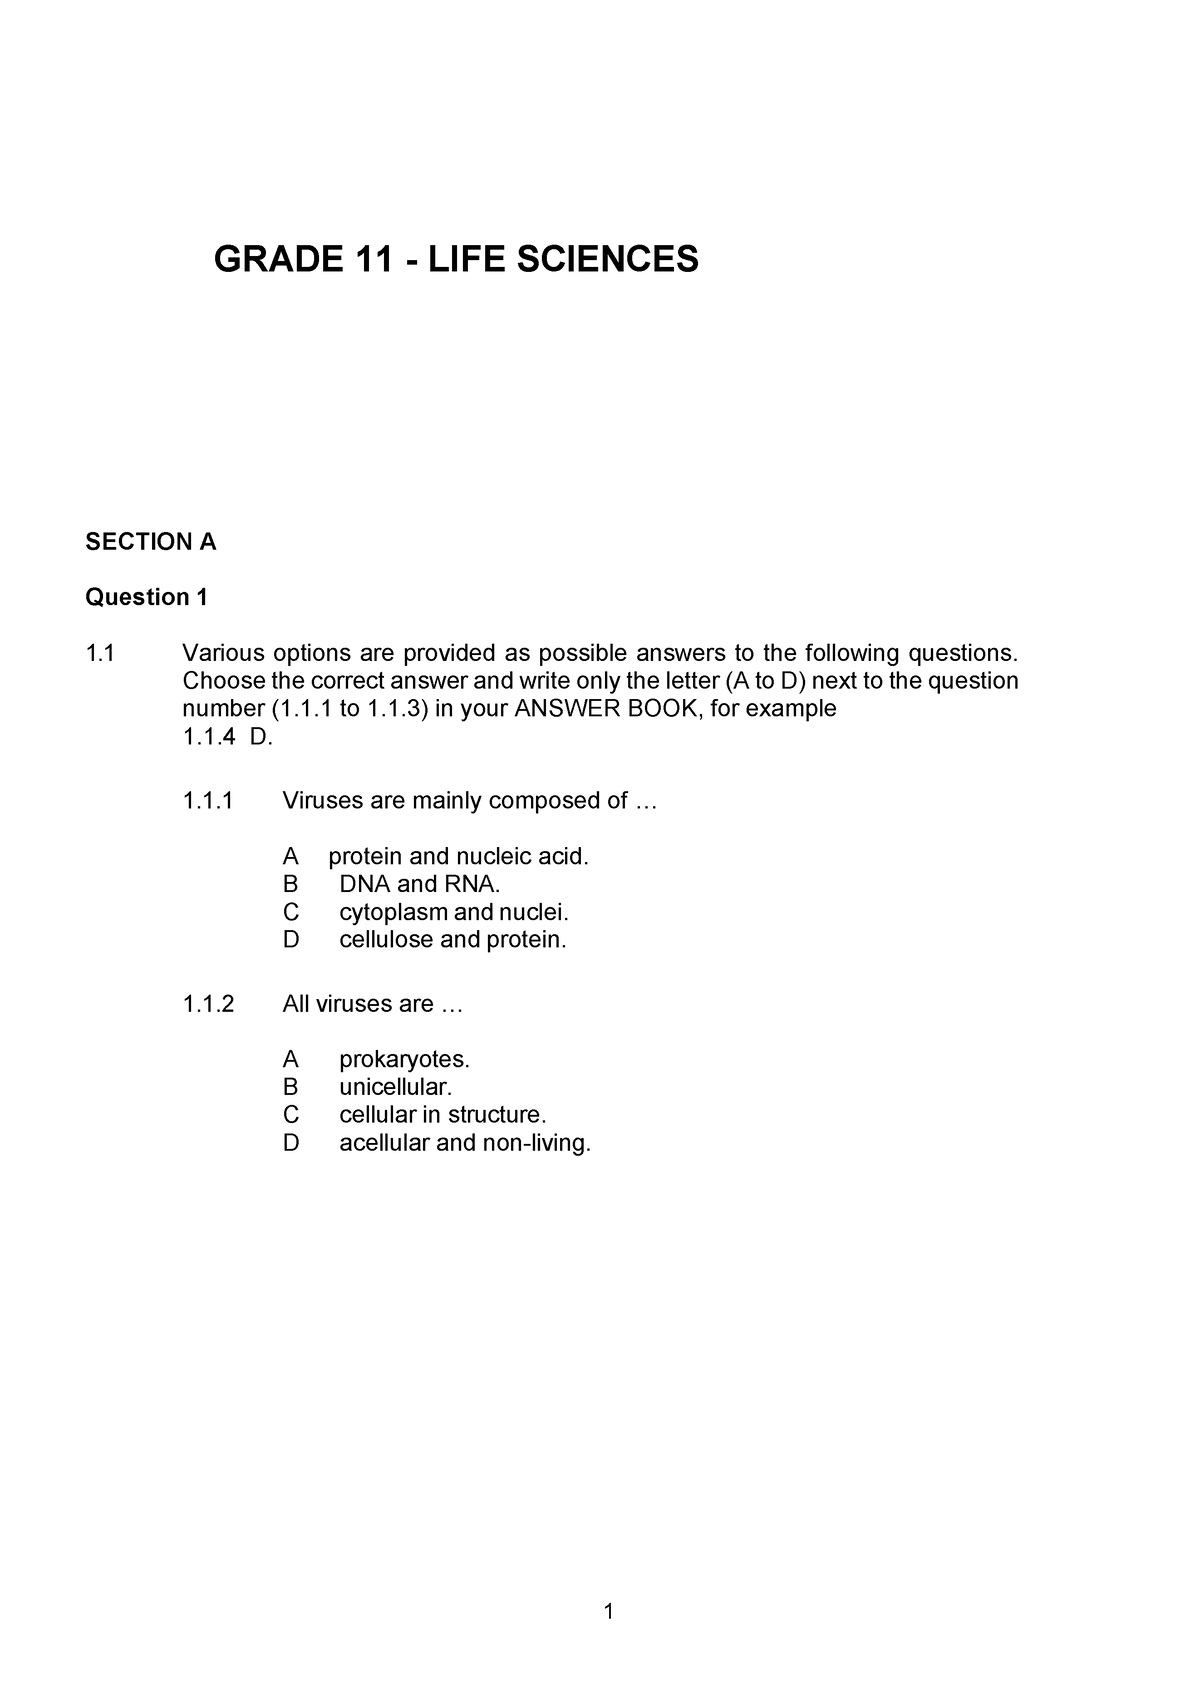 life science grade 11 assignment may 2022